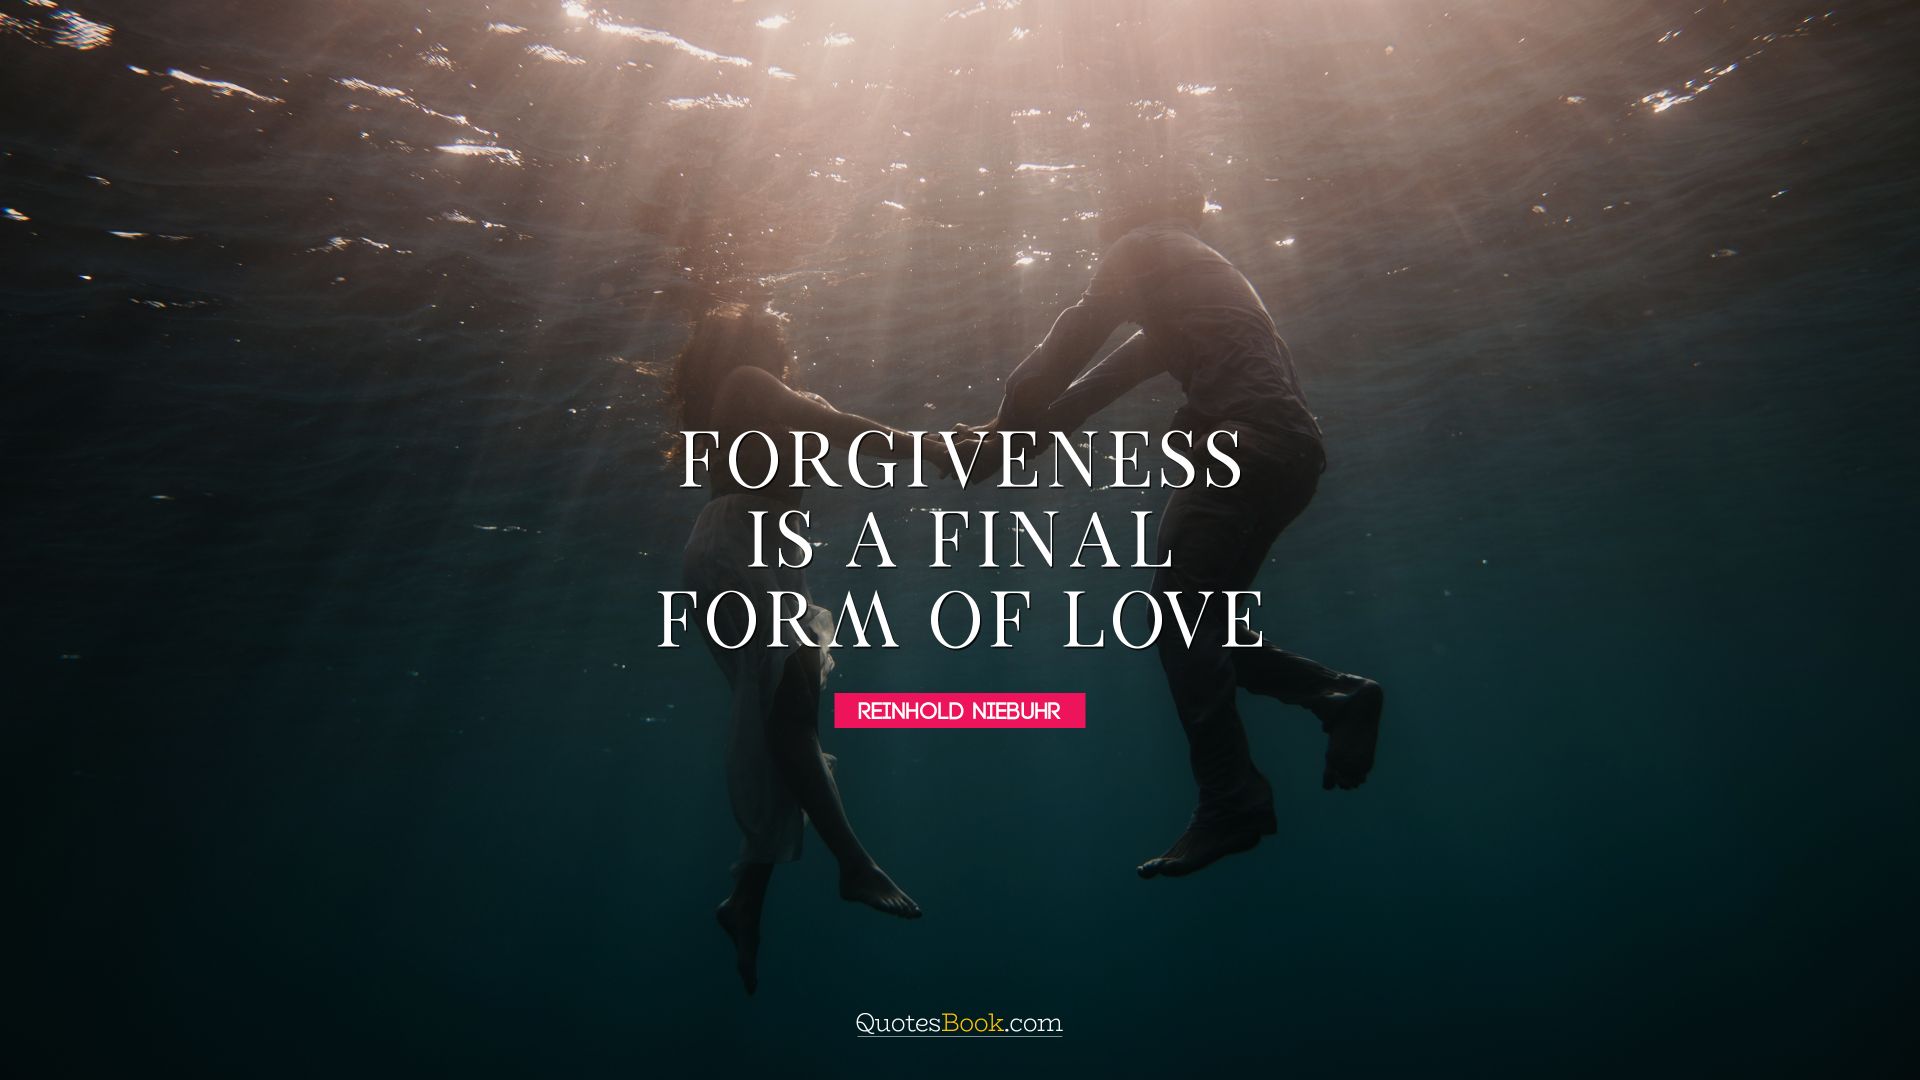 Forgiveness is a final form of love. - Quote by Reinhold Niebuhr